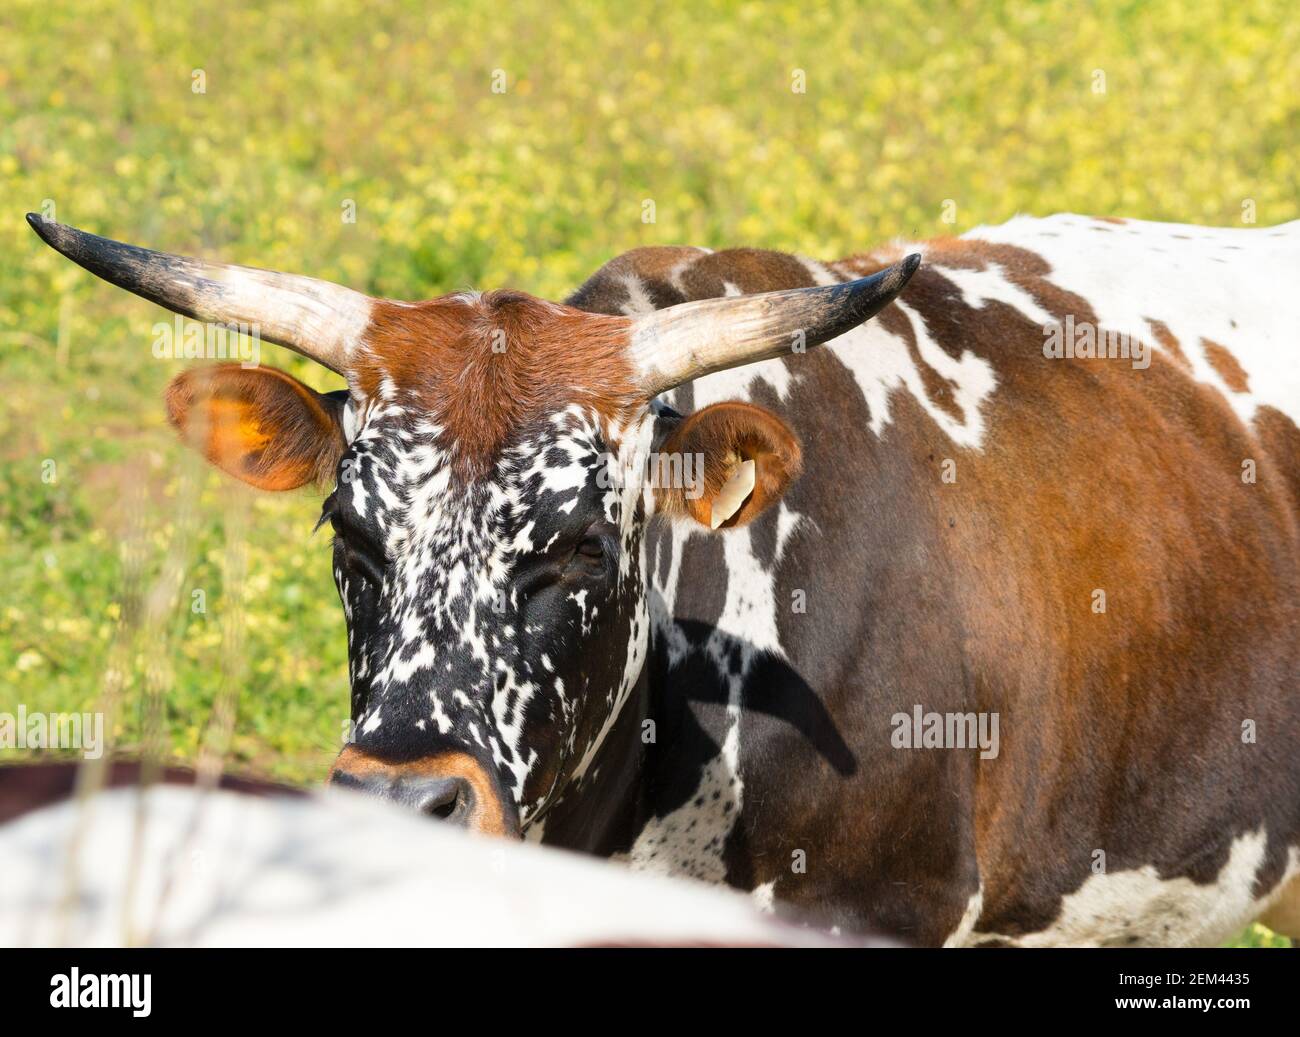 Nguni cow or cattle closeup showing its face and horns on a farm in South Africa Stock Photo